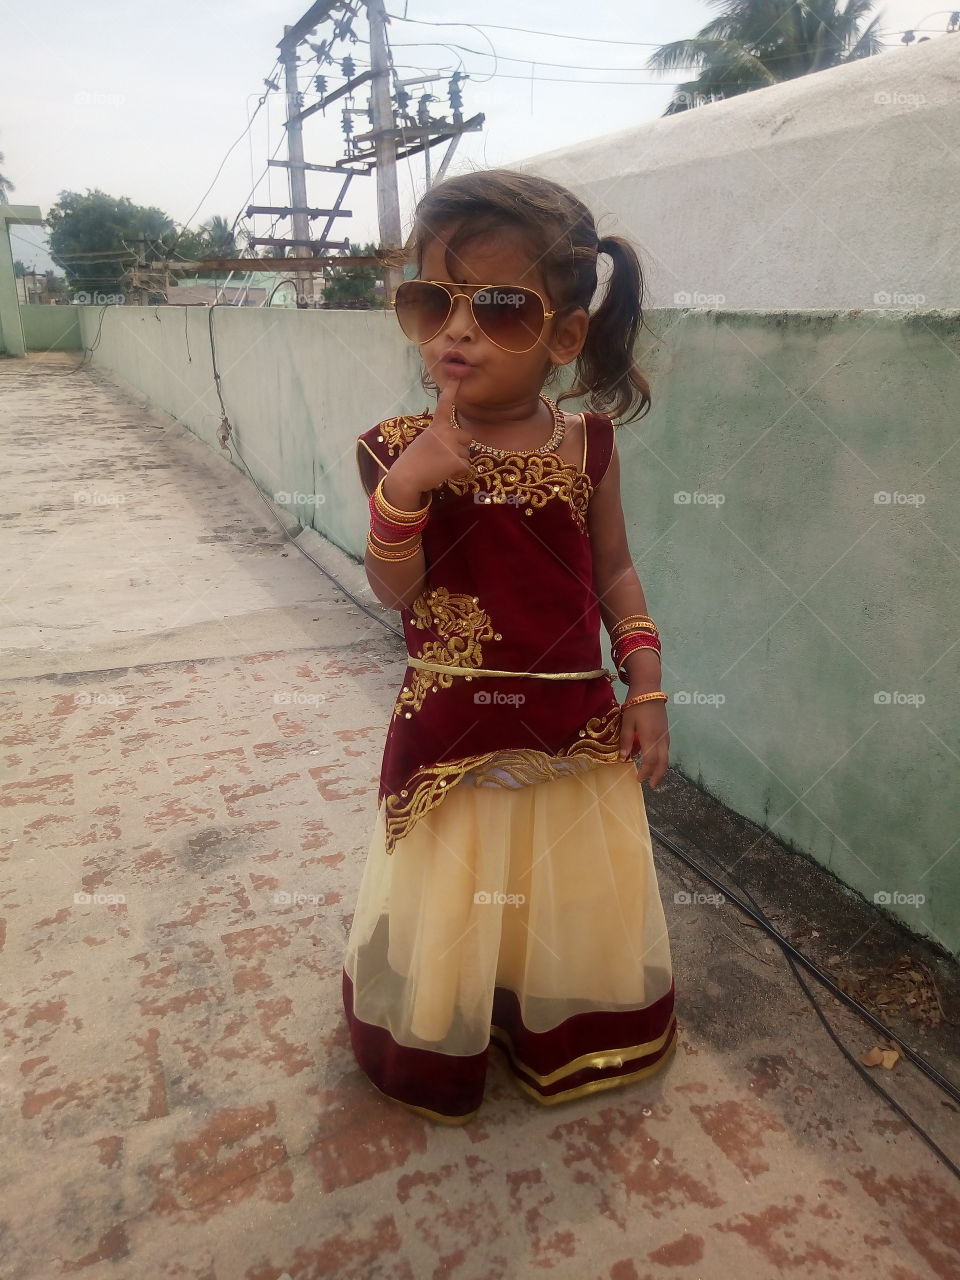 Tamil baby